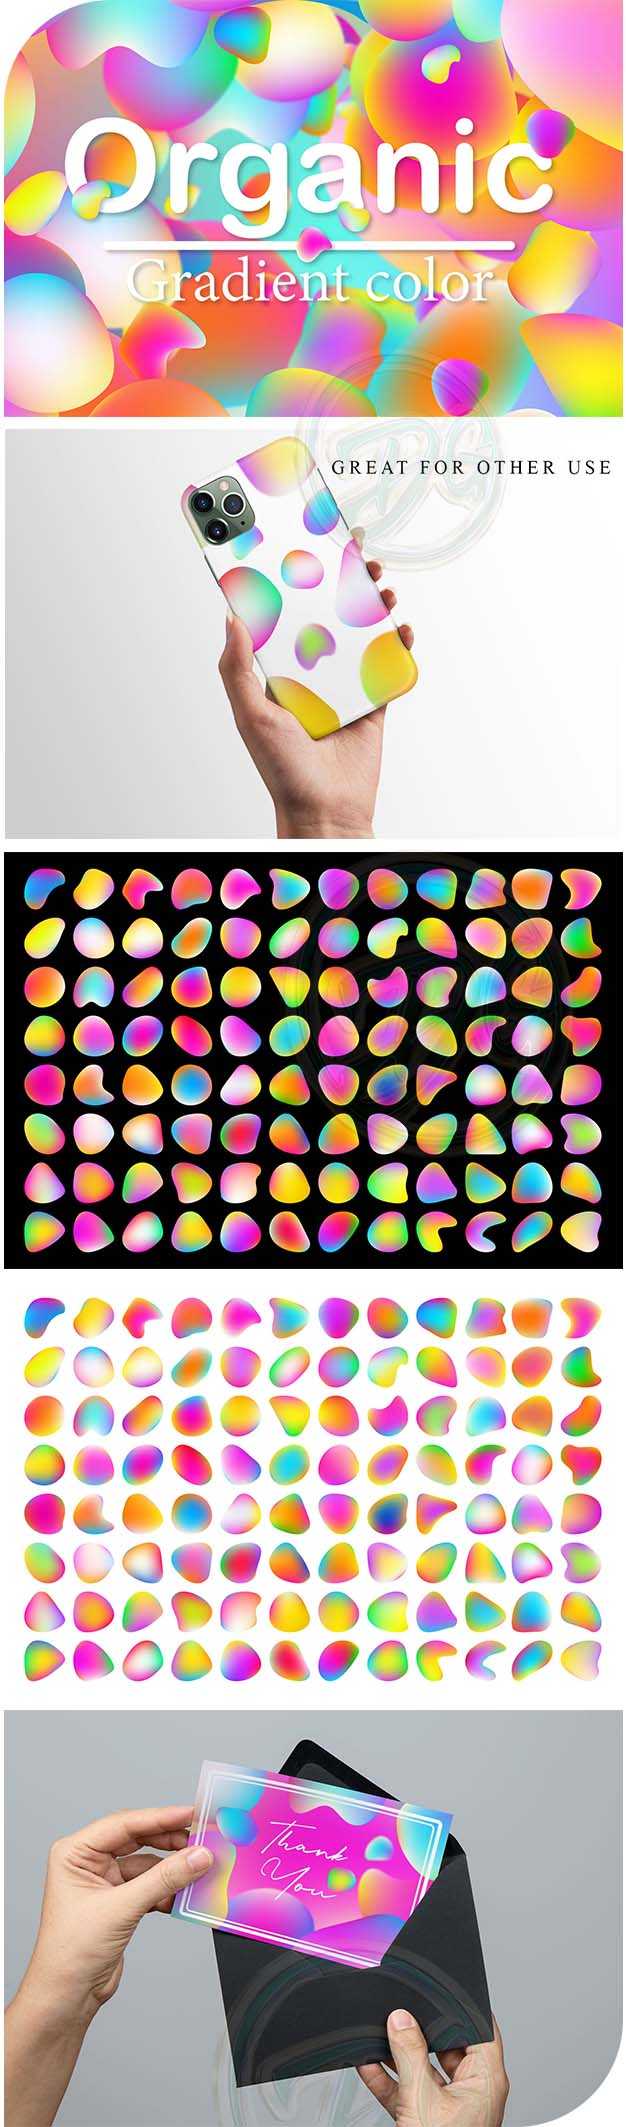 100 Colorful Organic Shape Gradients PNG Collection Free